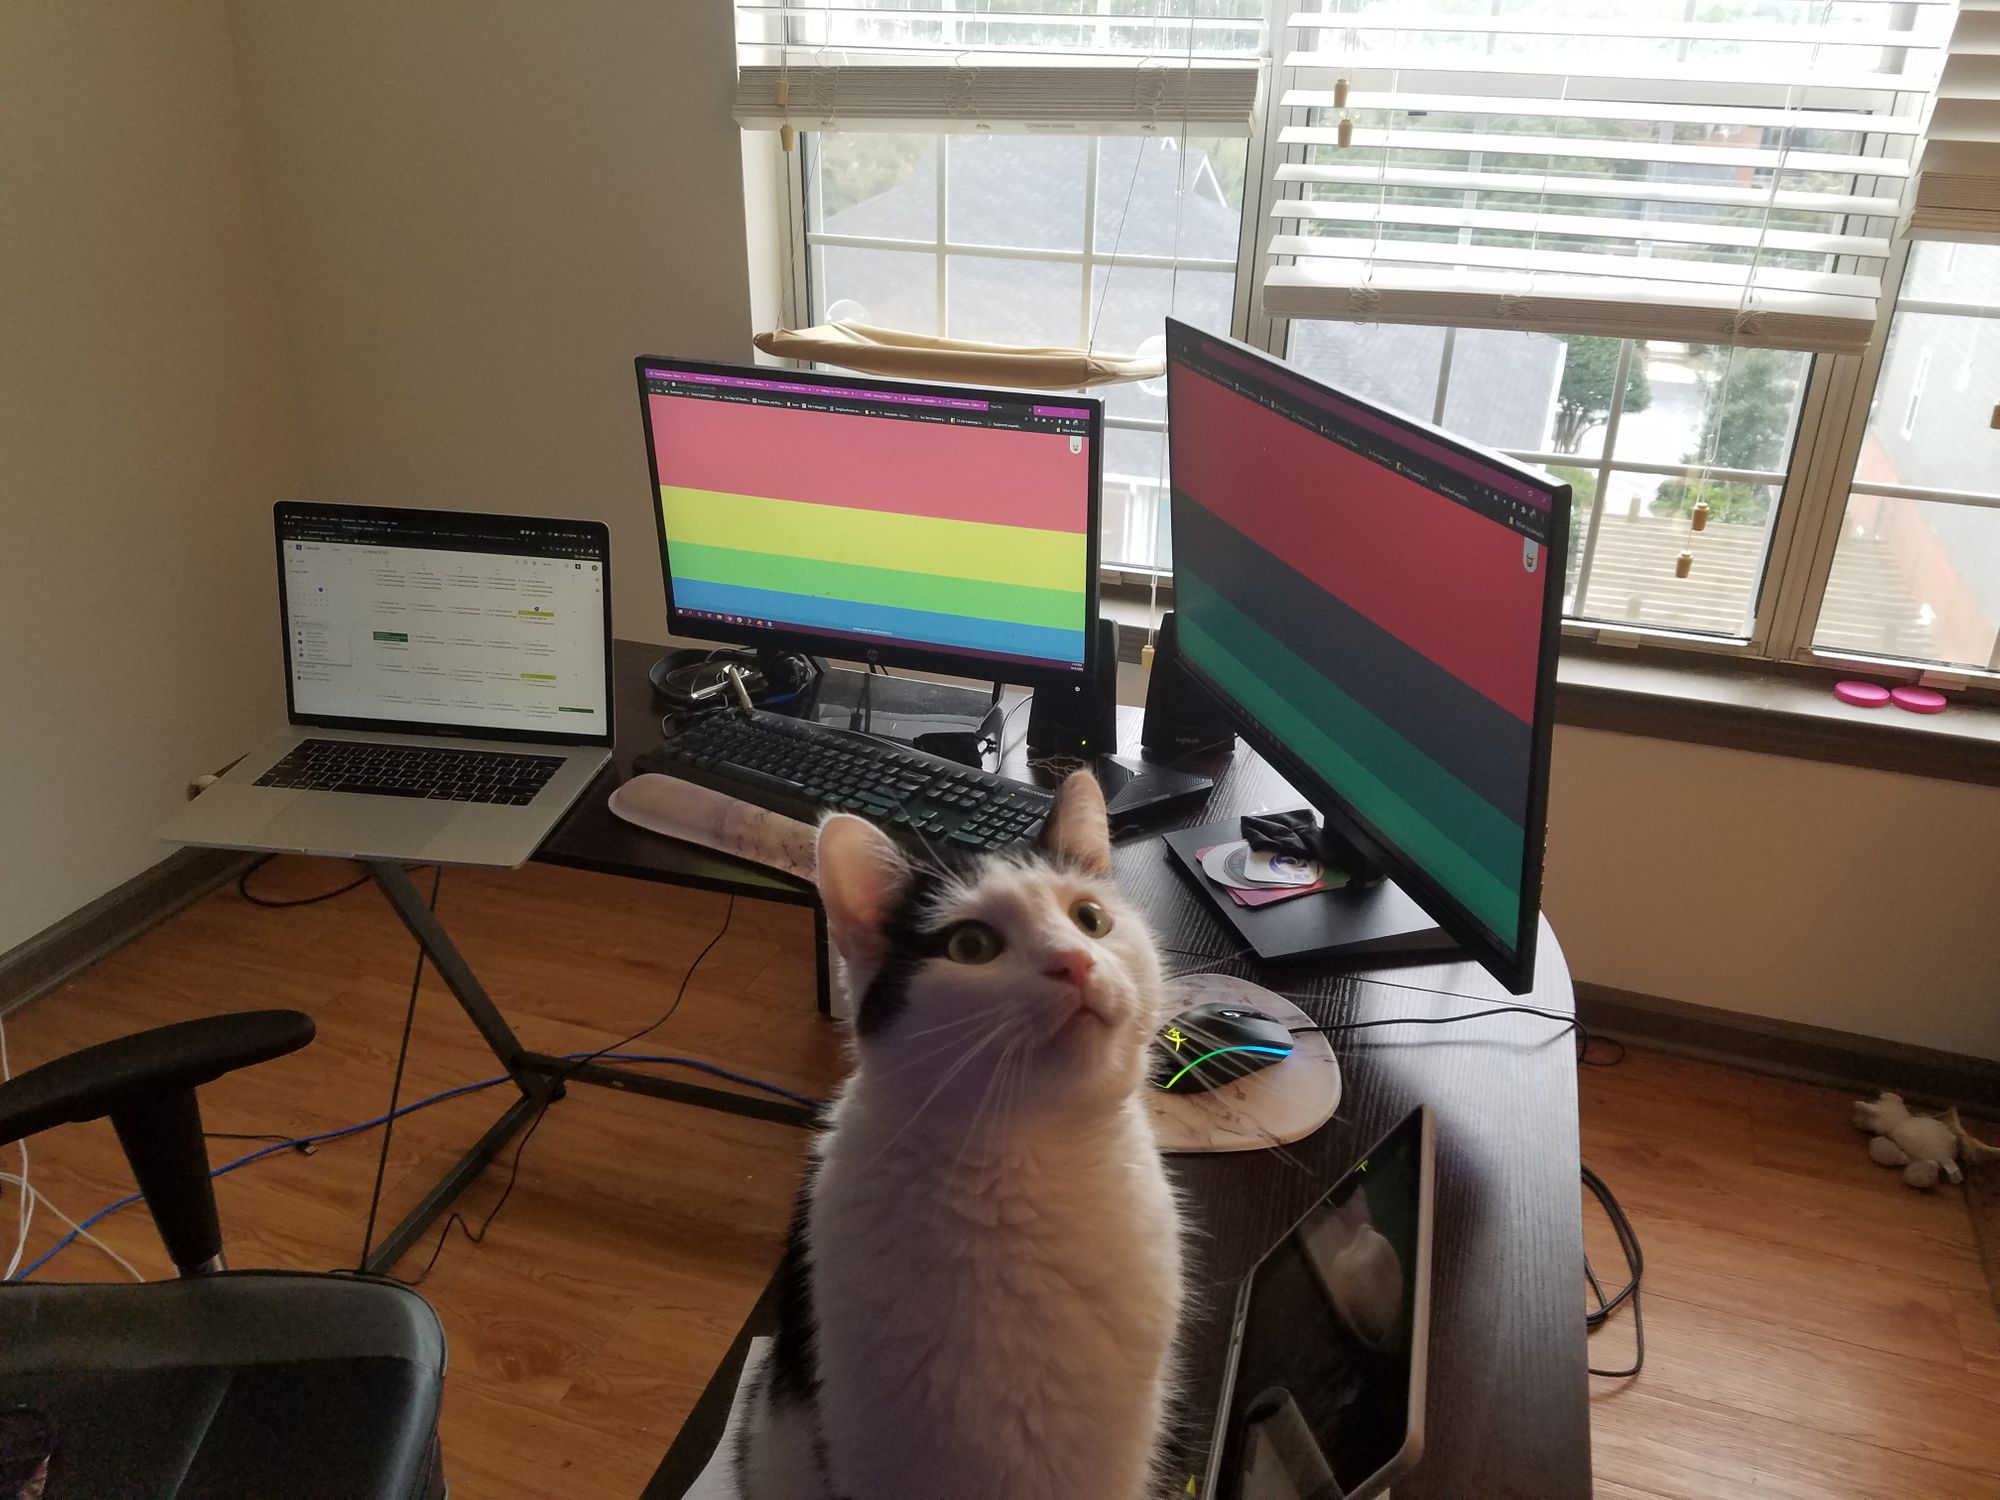 Iesha's workspace wouldn't be complete without her cat, Domino